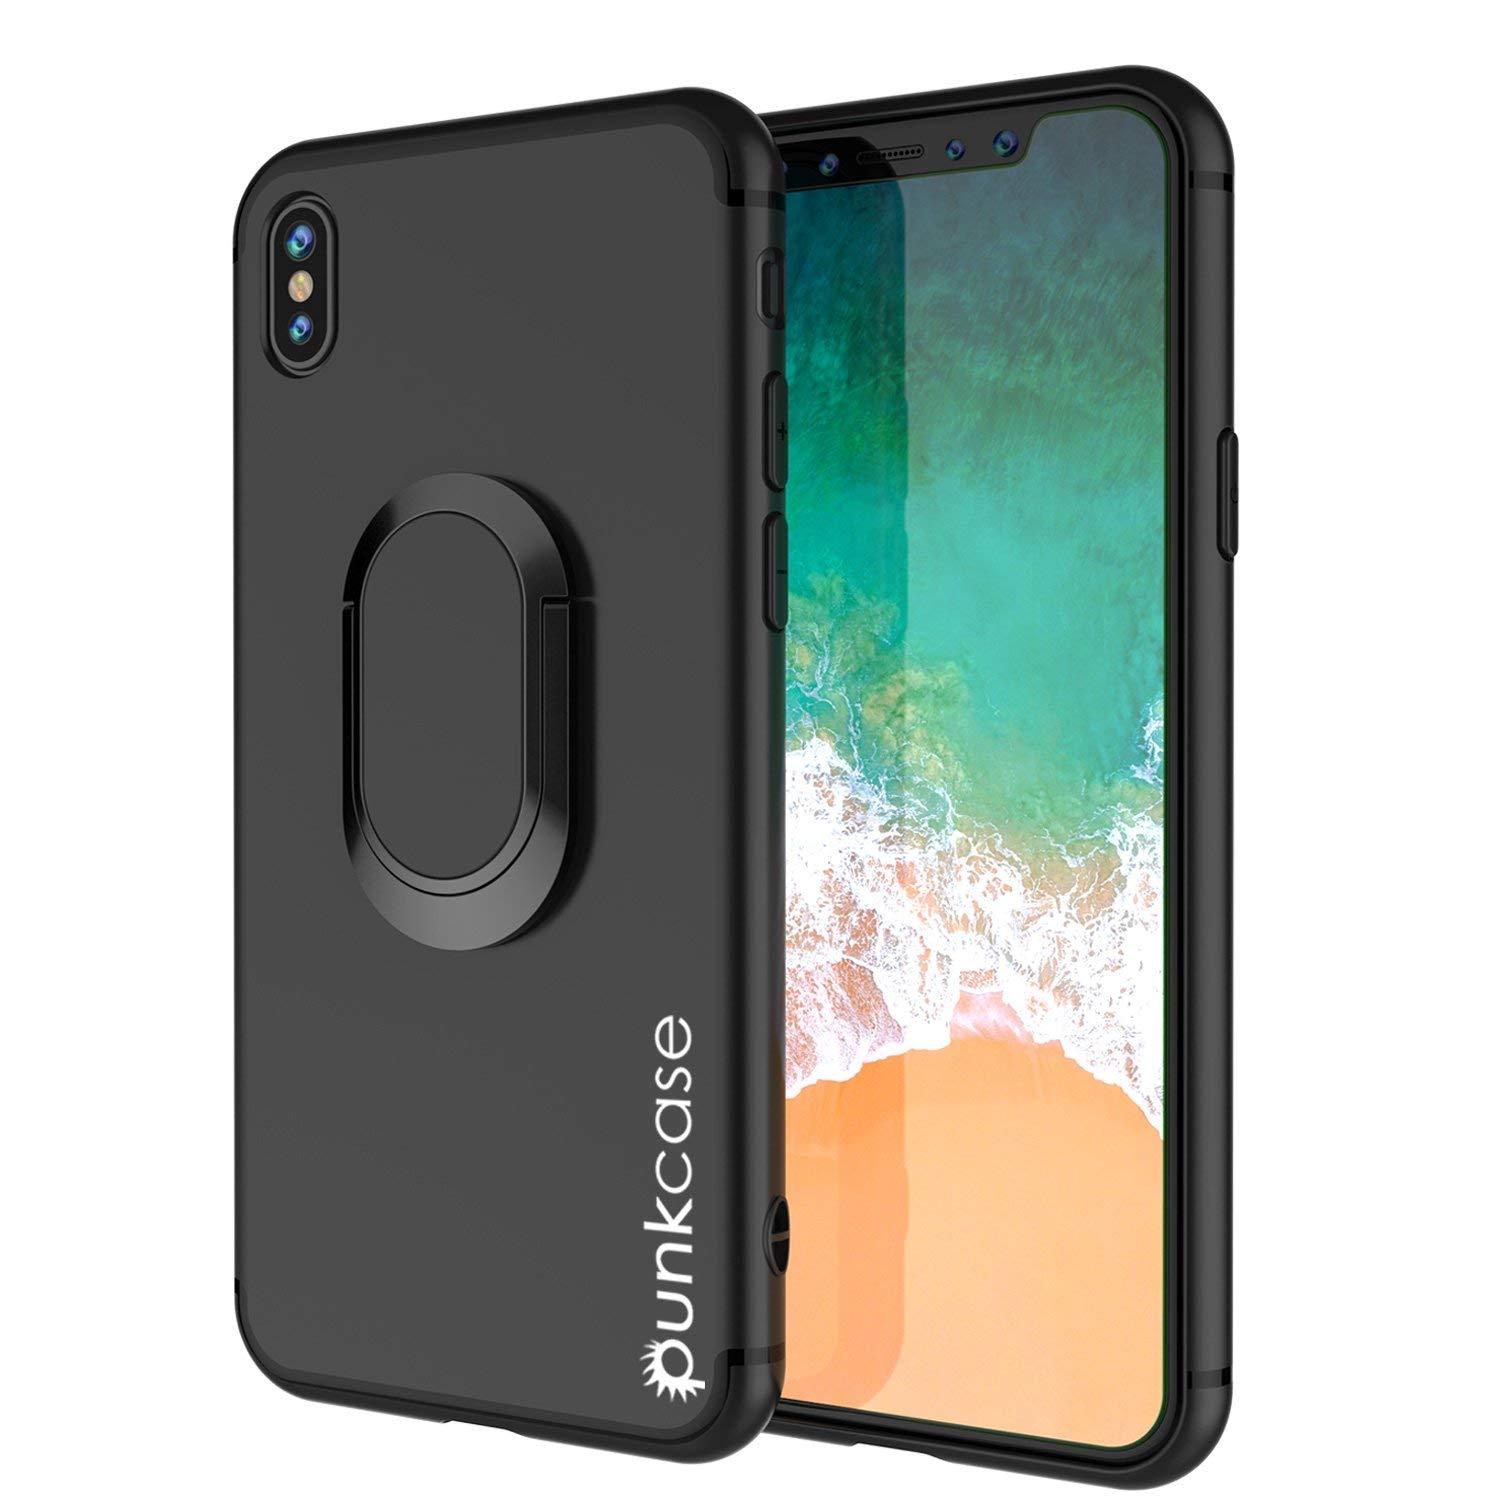 iPhone XR Case, Punkcase Magnetix Protective TPU Cover W/ Kickstand, Tempered Glass Screen Protector [Black] - PunkCase NZ